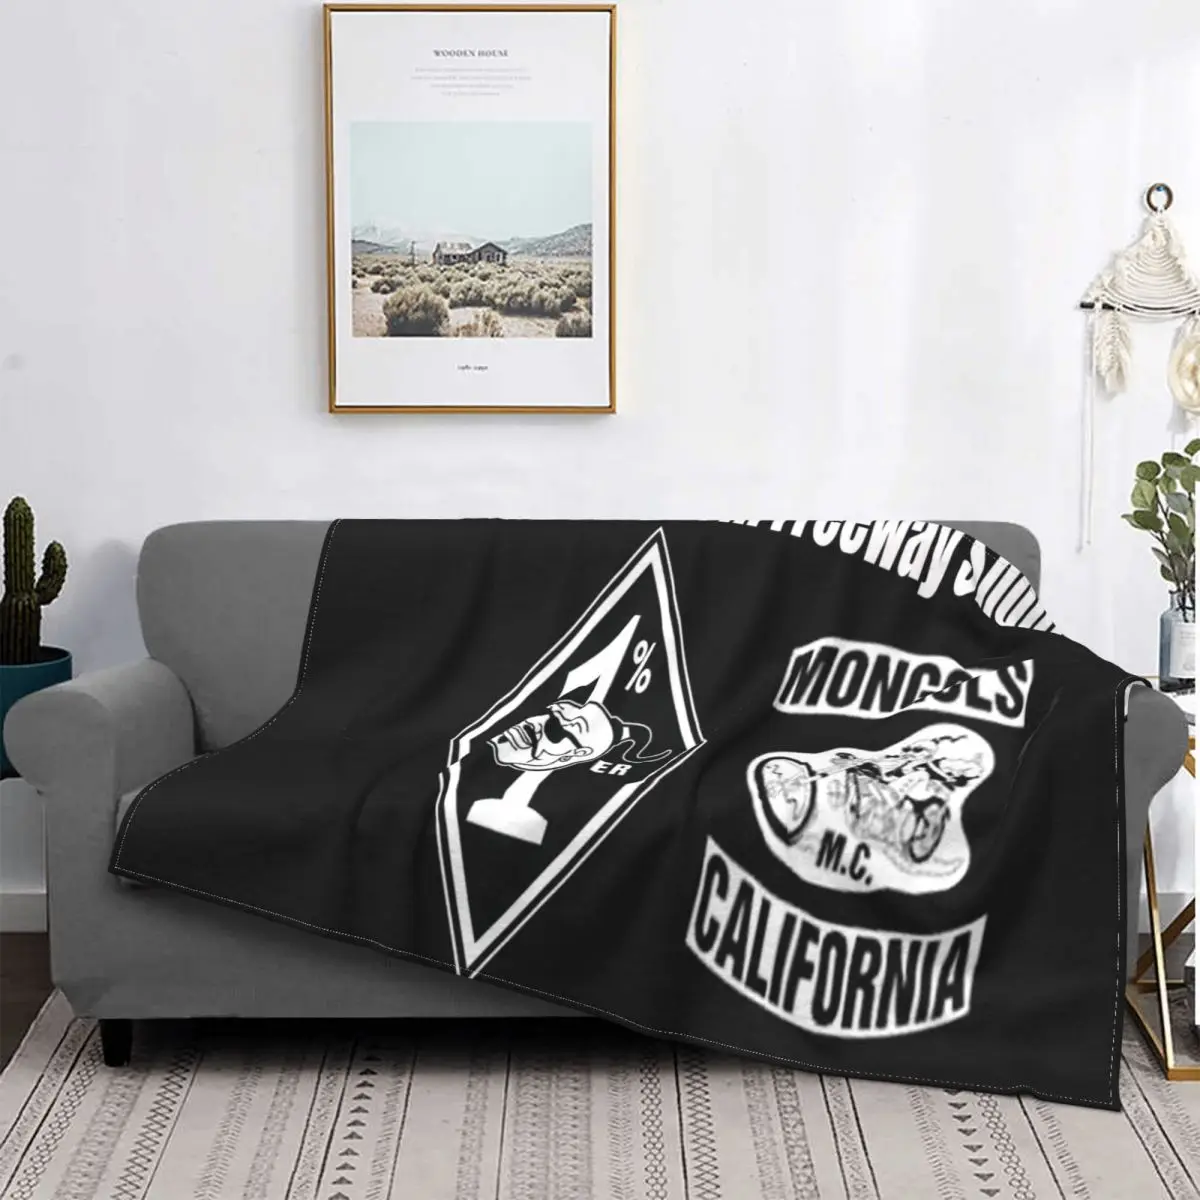 Mongols Mc California Blanket Bedspread Bed Plaid Duvets Beach Blanket Blankets For Bed